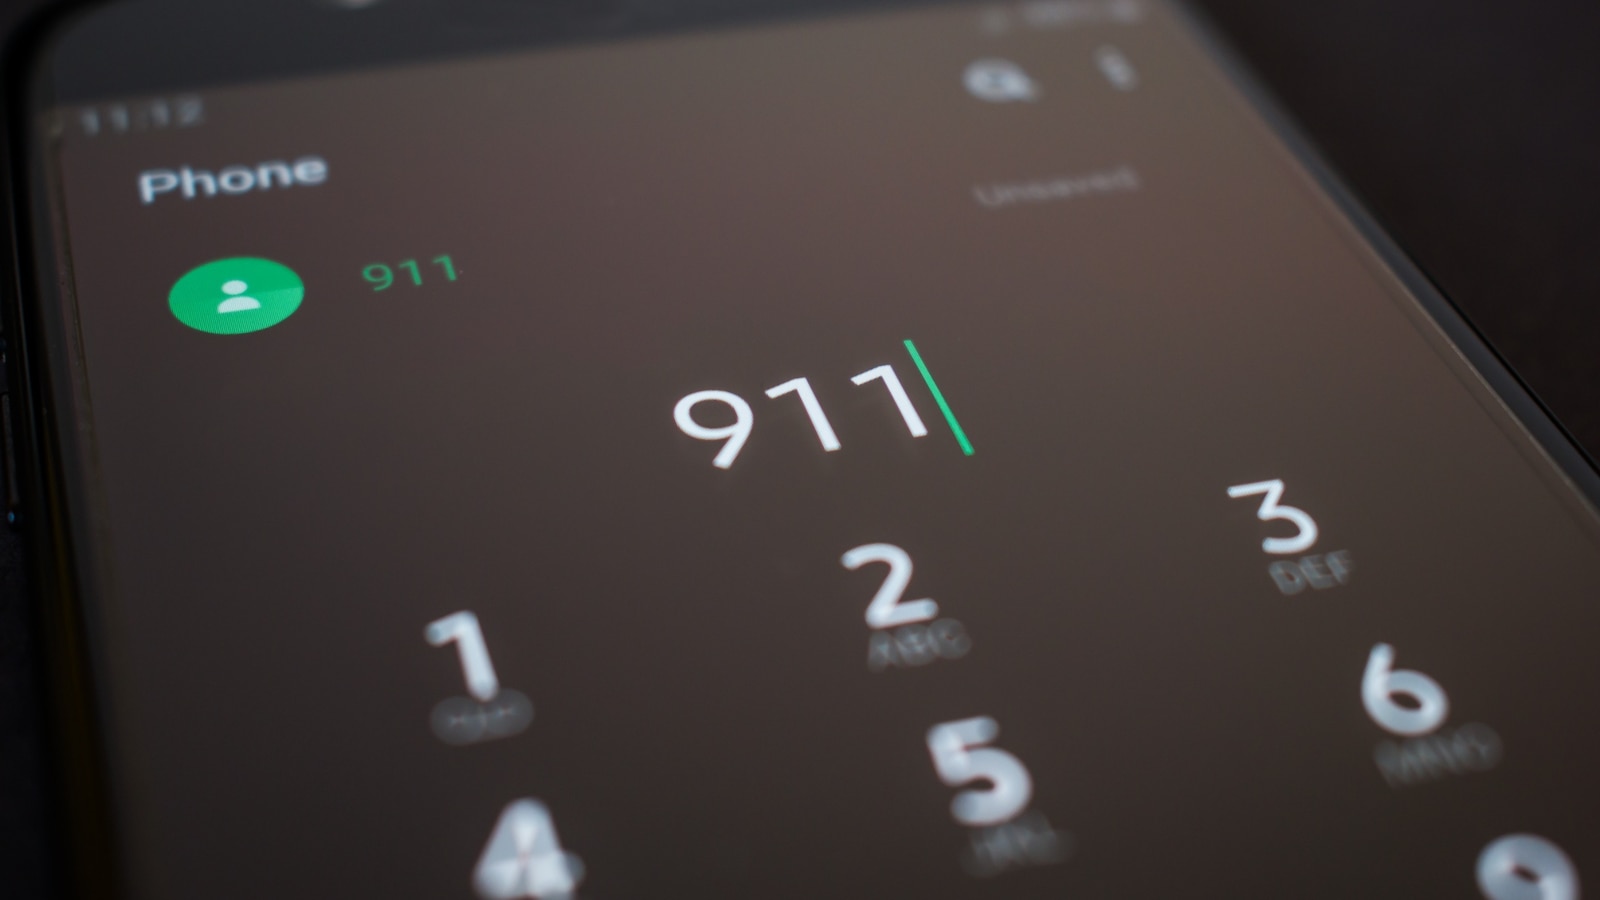 Statewide 911 outage reported in Massachusetts